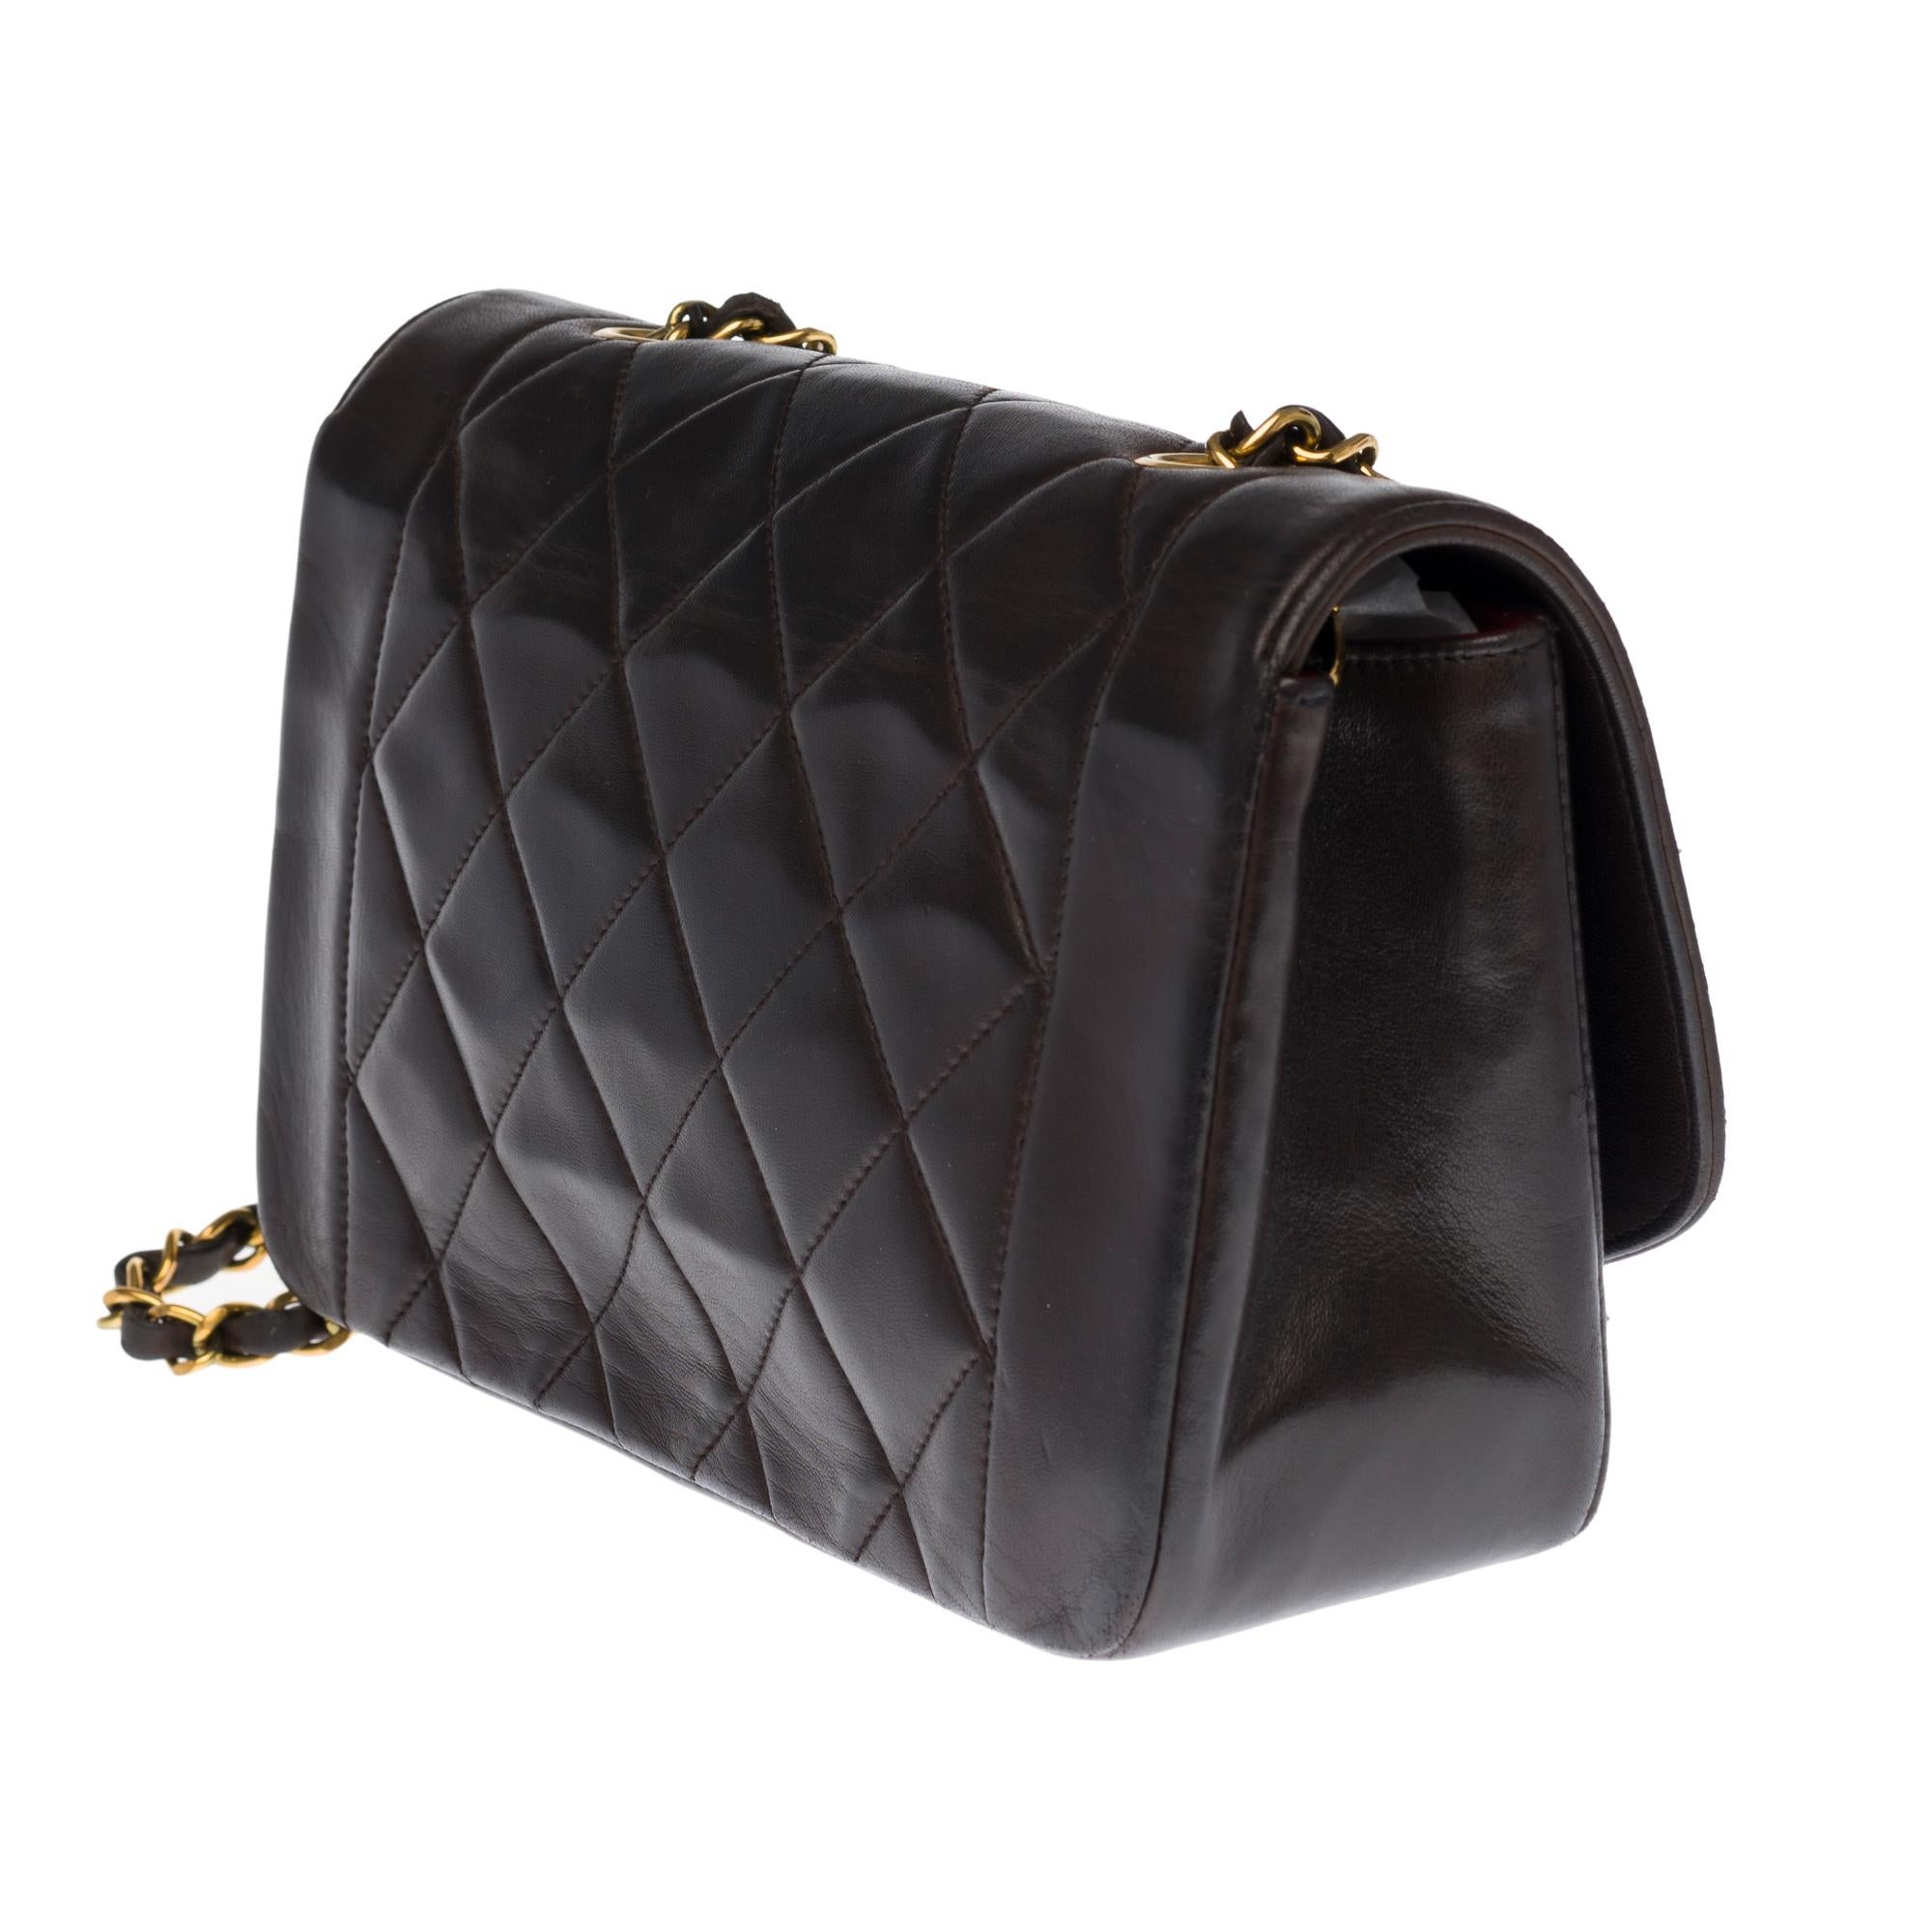 Black Stunning Chanel Diana Shoulder bag in brown quilted leather with gold hardware